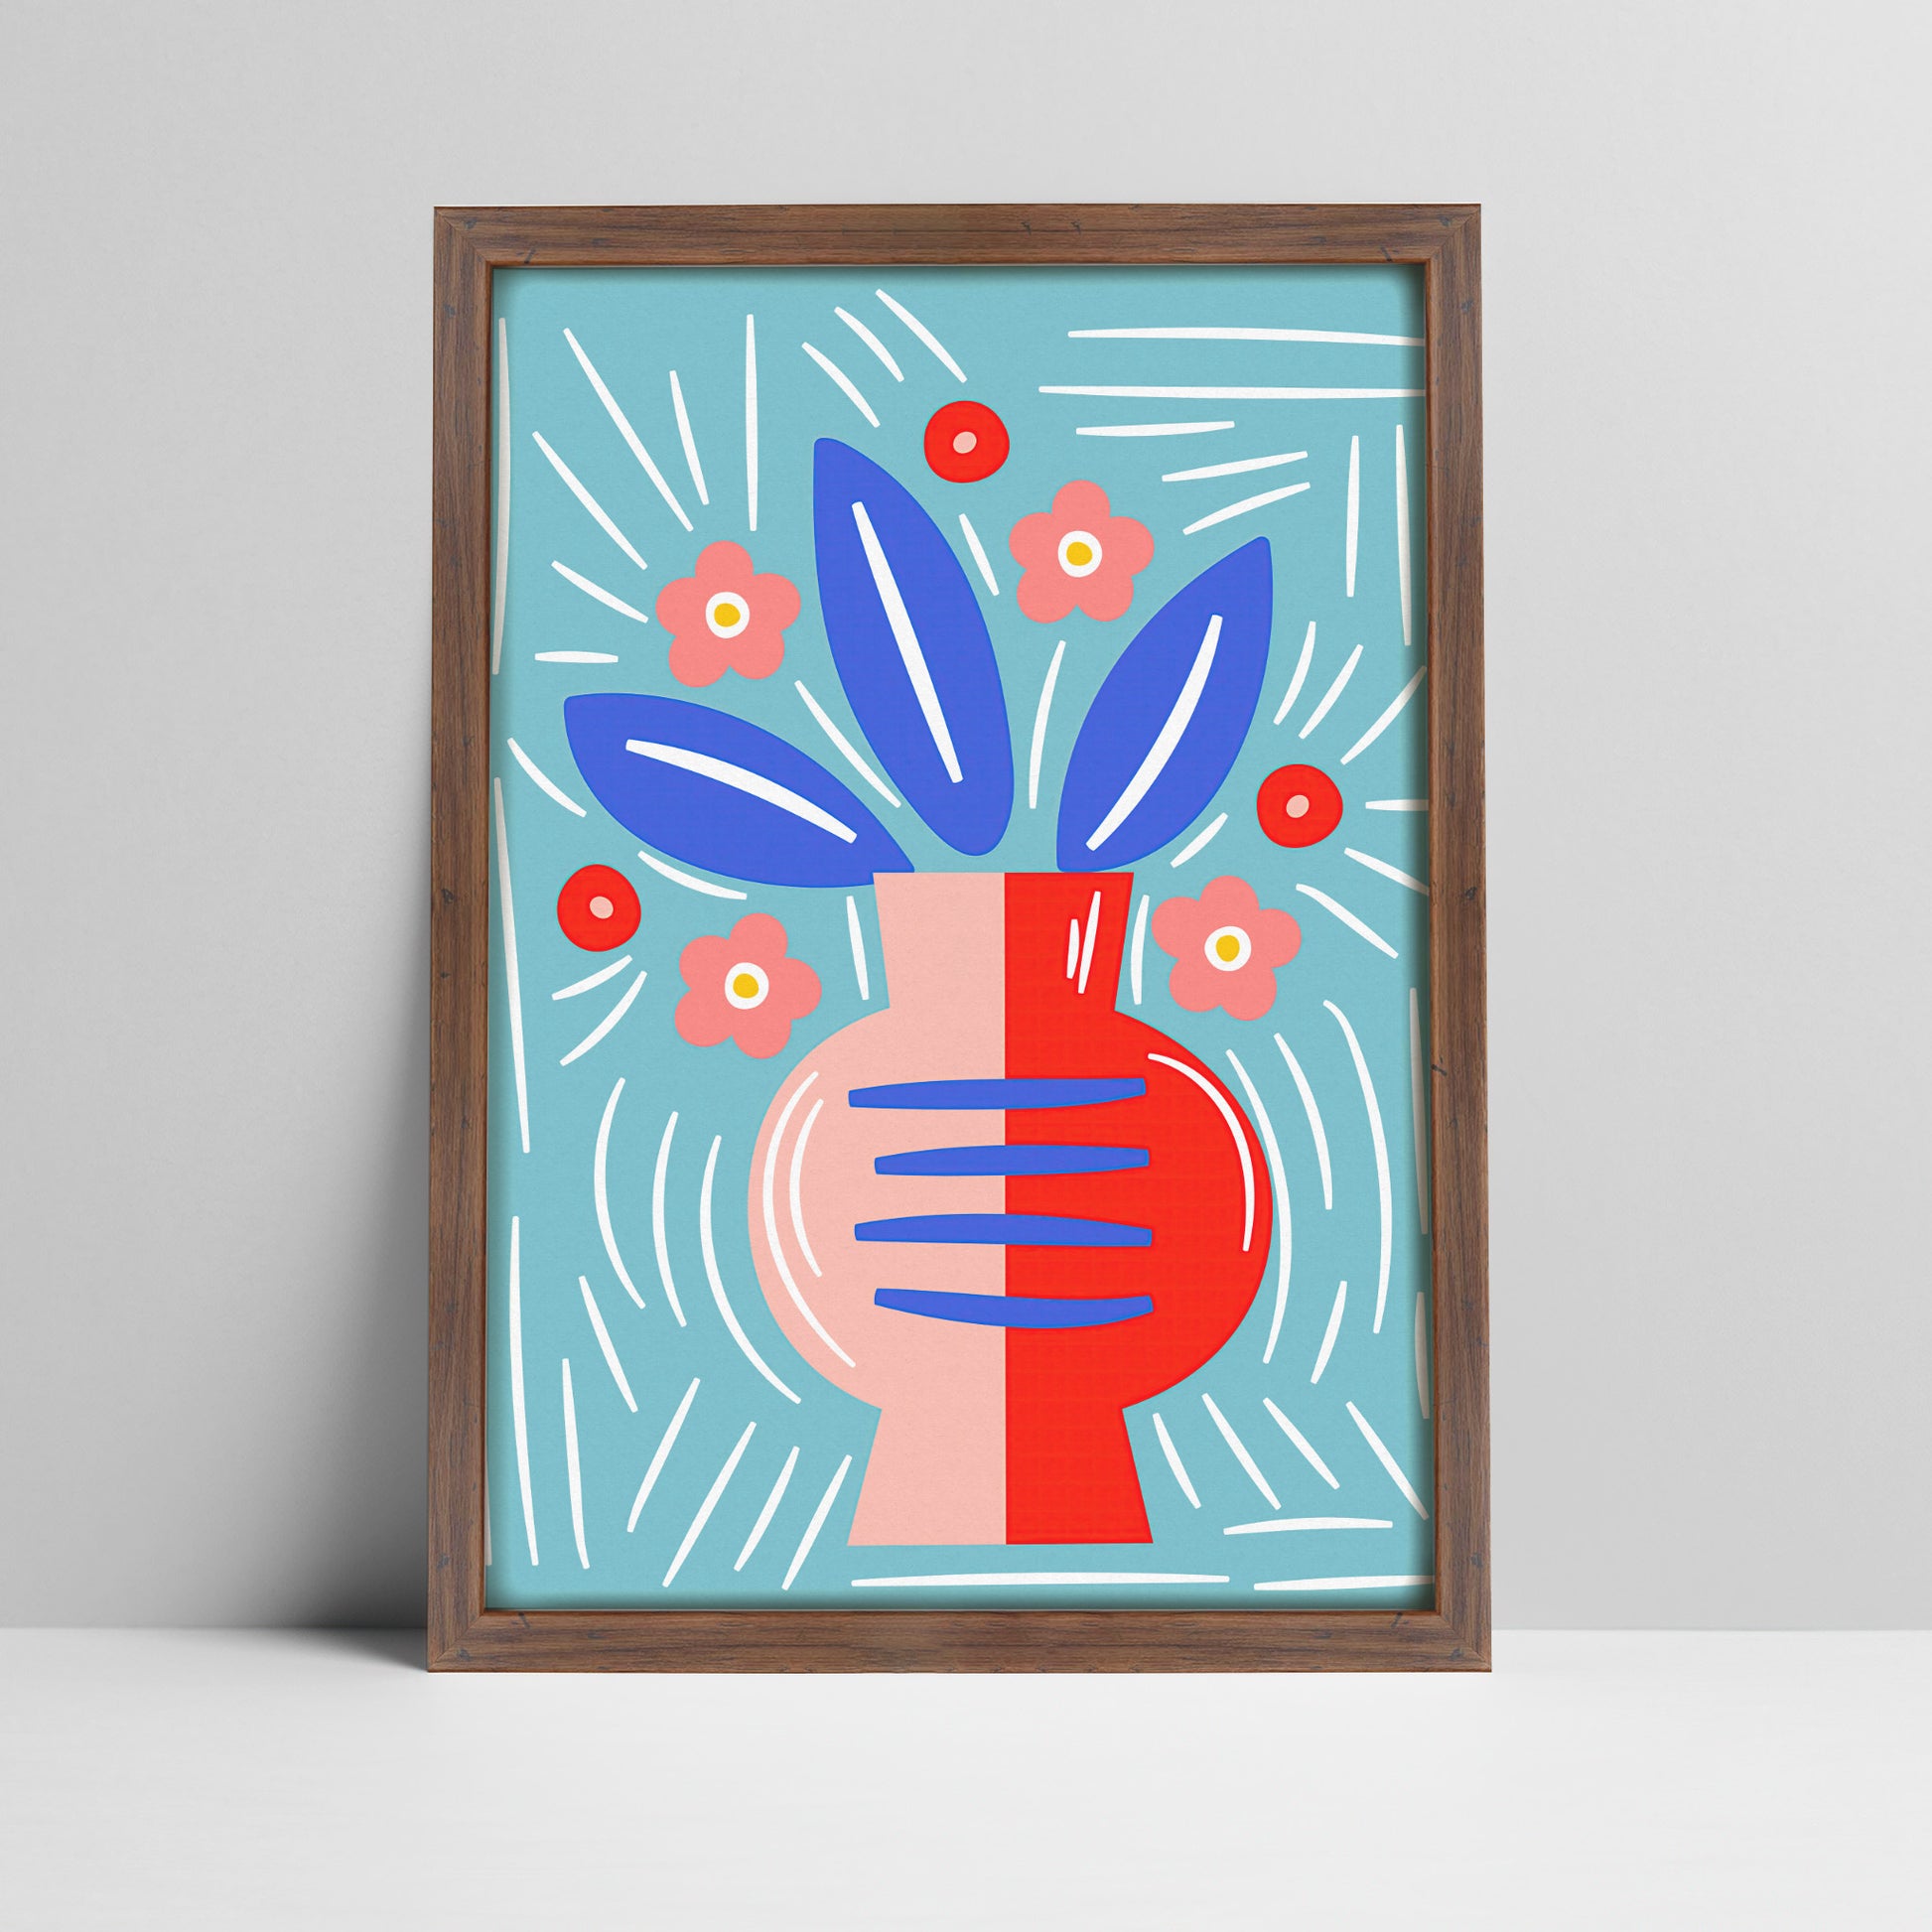 Abstract floral art print with blue leaves and pink vase on a light blue background in a dark wood frame